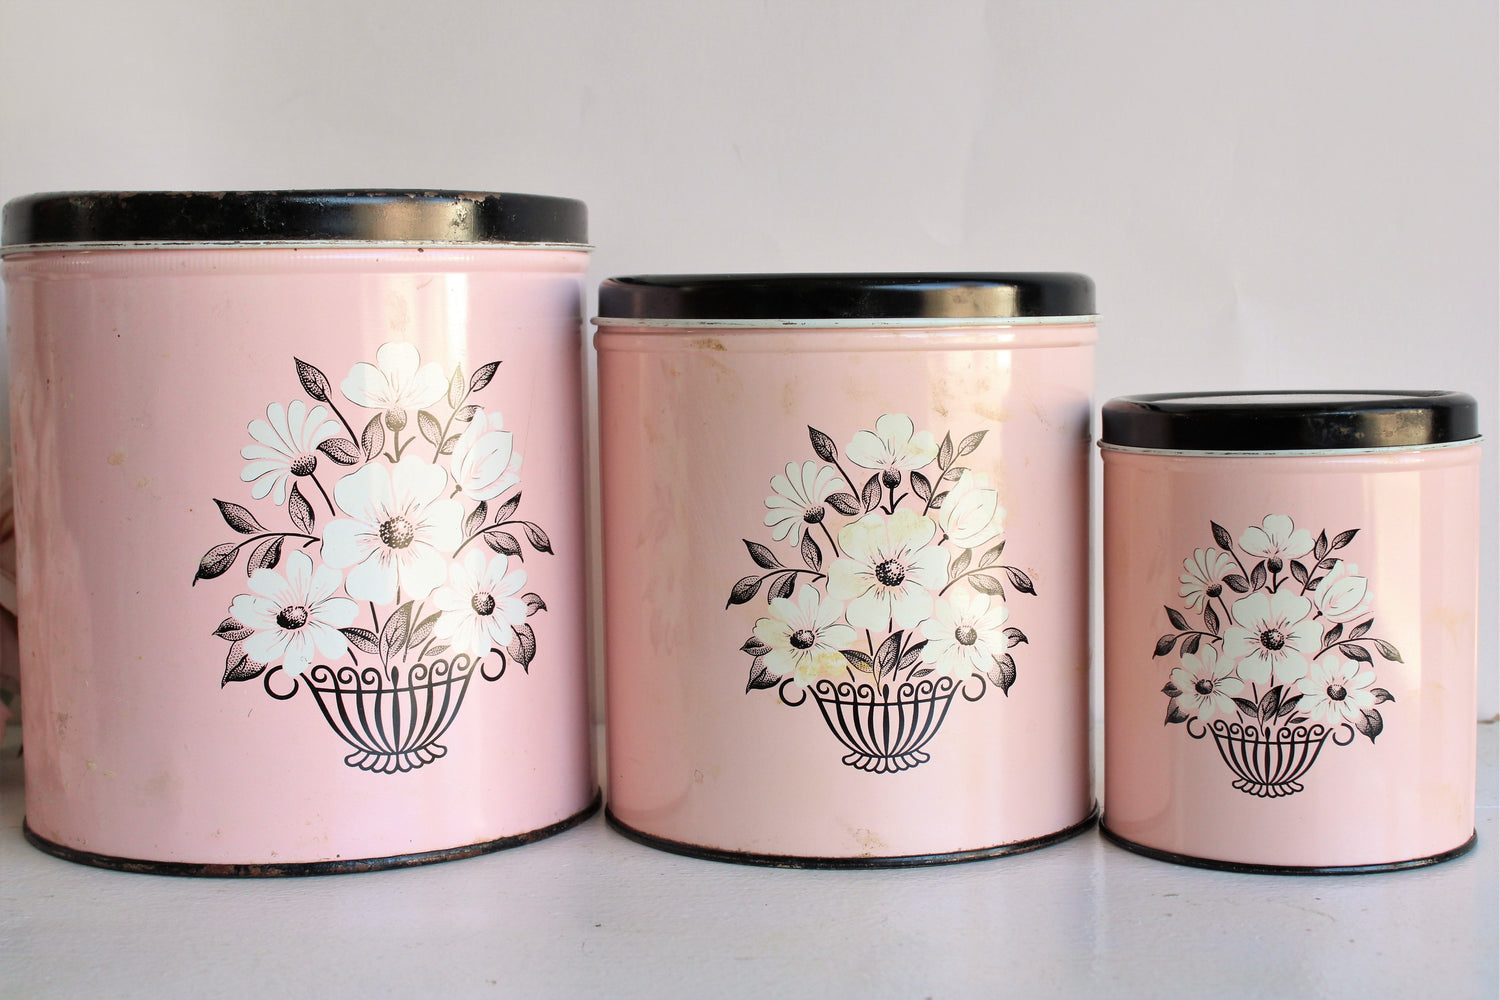 This item is unavailable -   Vintage canister sets, Vintage